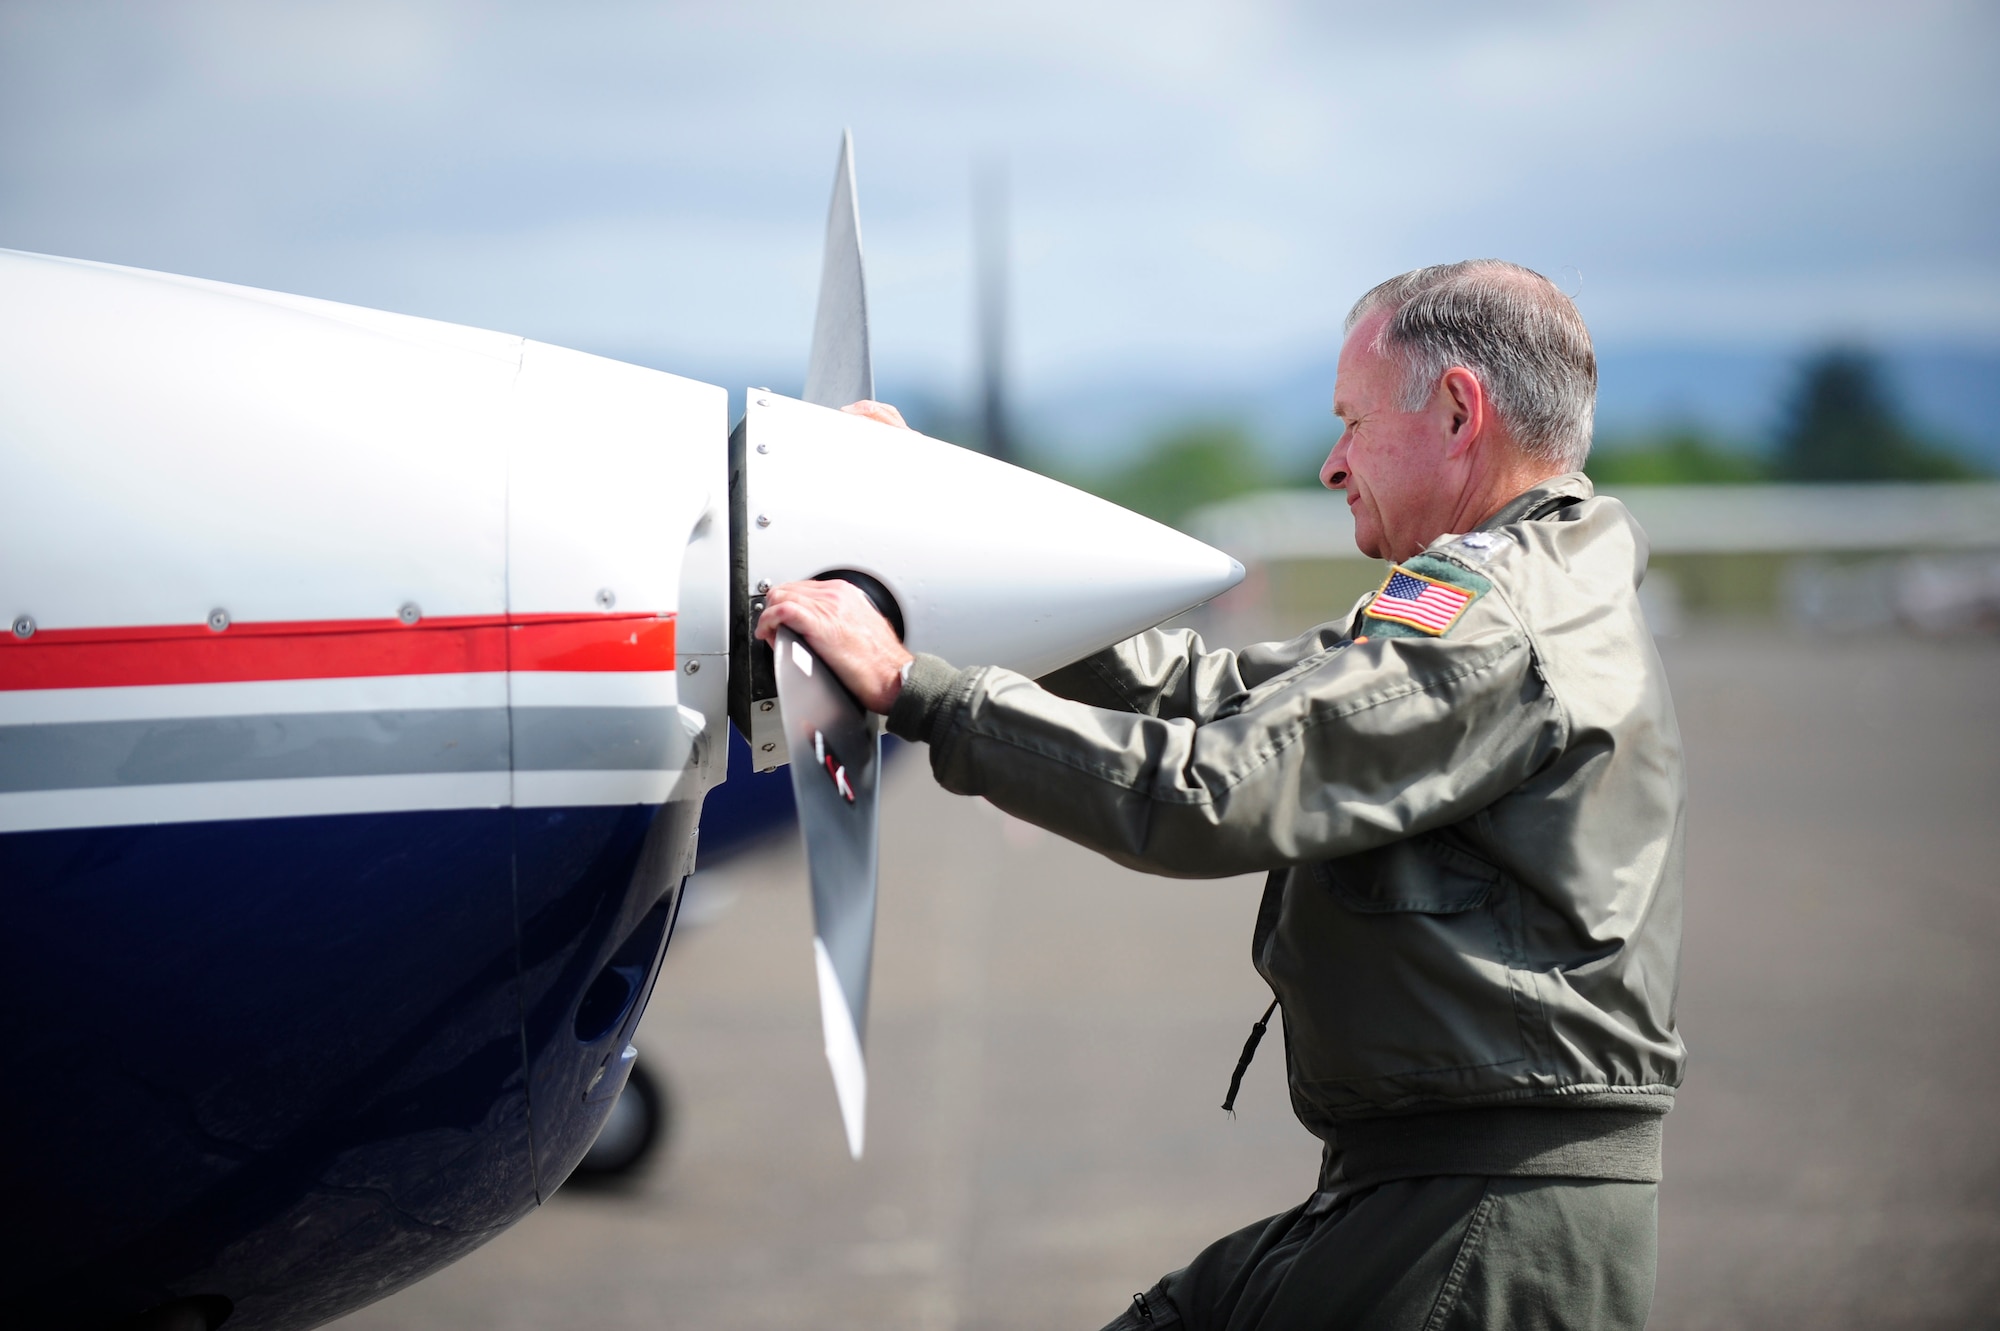 Lt. Col. Wayne Schulz, U.S. Air Force Auxiliary, Civil Air Patrol, conducts preflight checks on a C-182 Cessna before departing Astoria, Ore., during Amalgam Dart 2009, June 18. Amalgam Dart is a field test of the Department of Defense's ability to rapidly deploy a total air integrated defense system in the U.S. in order to deter, detect and defeat airborne threats. (U.S. Air Force photo by Staff Sgt. Jacob N. Bailey)